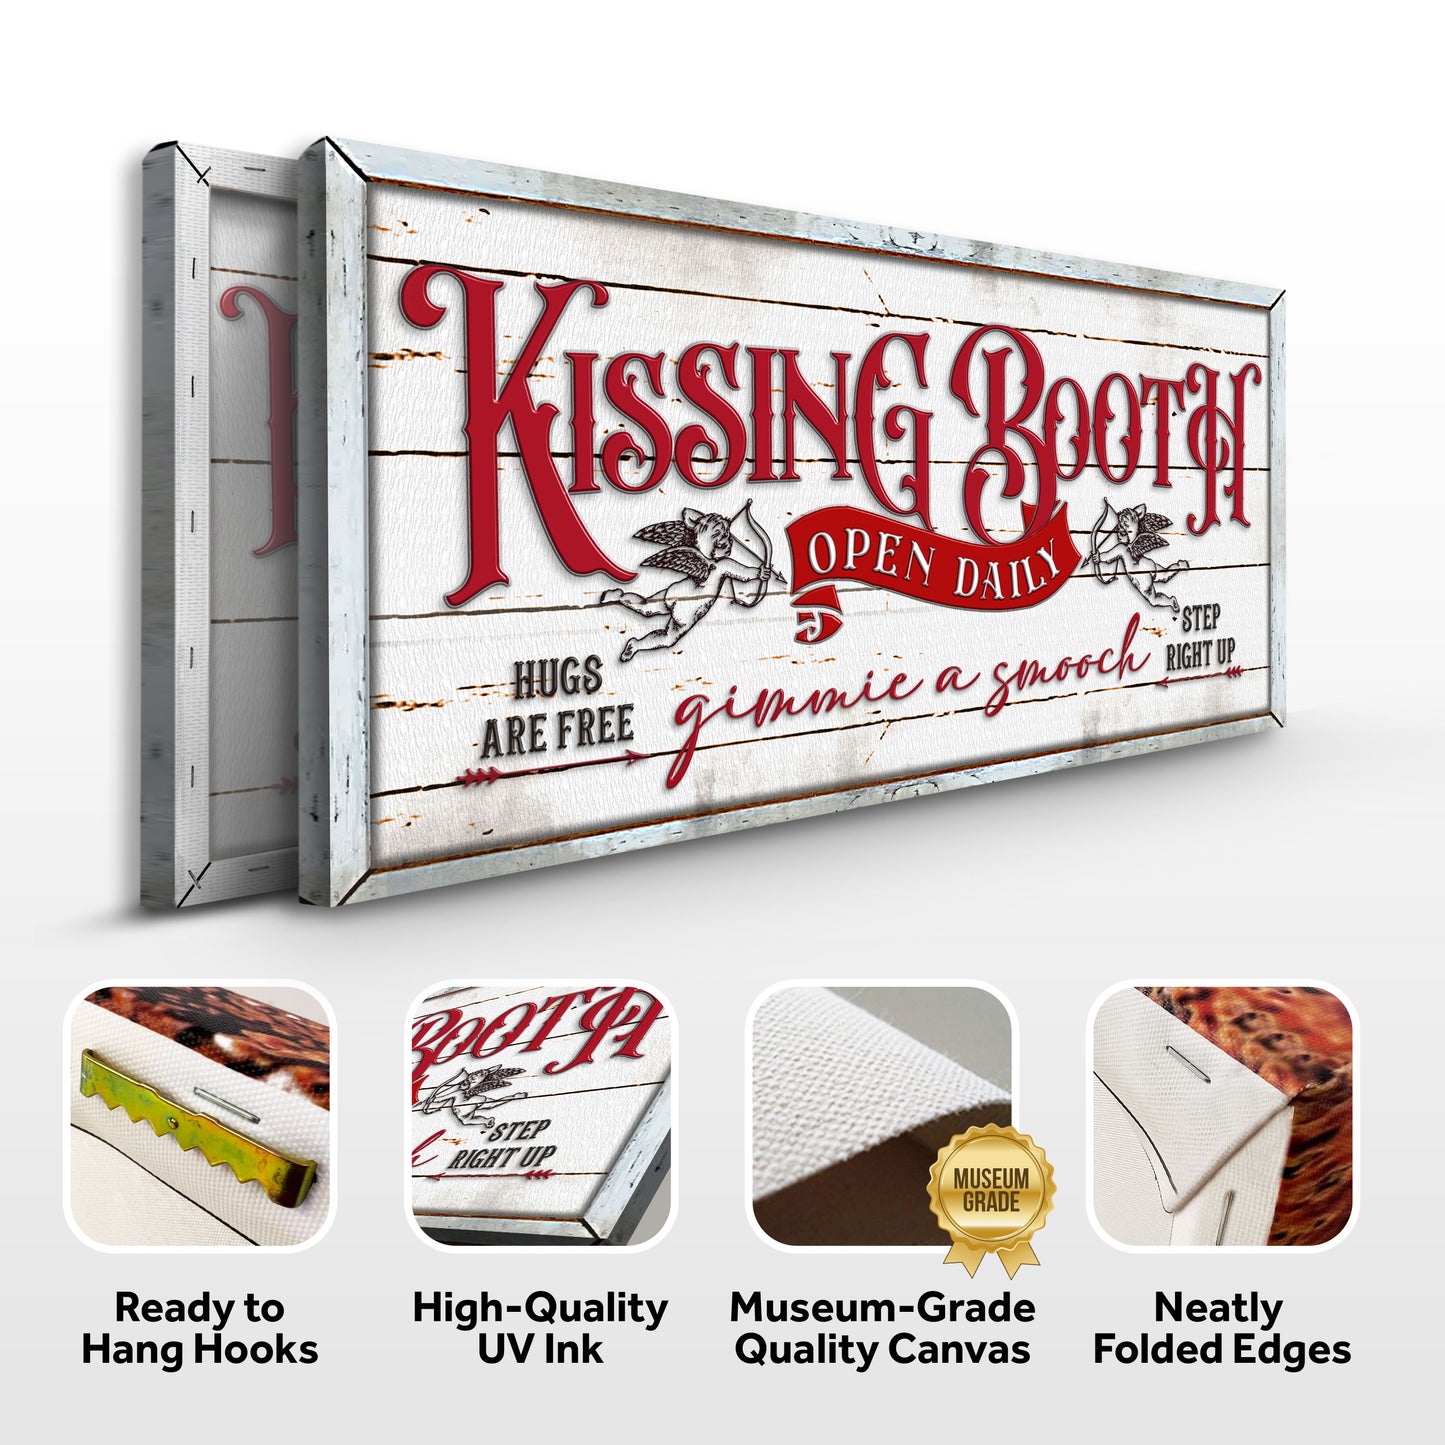 Vintage Rustic Kissing Booth Sign Specs - Image by Tailored Canvases